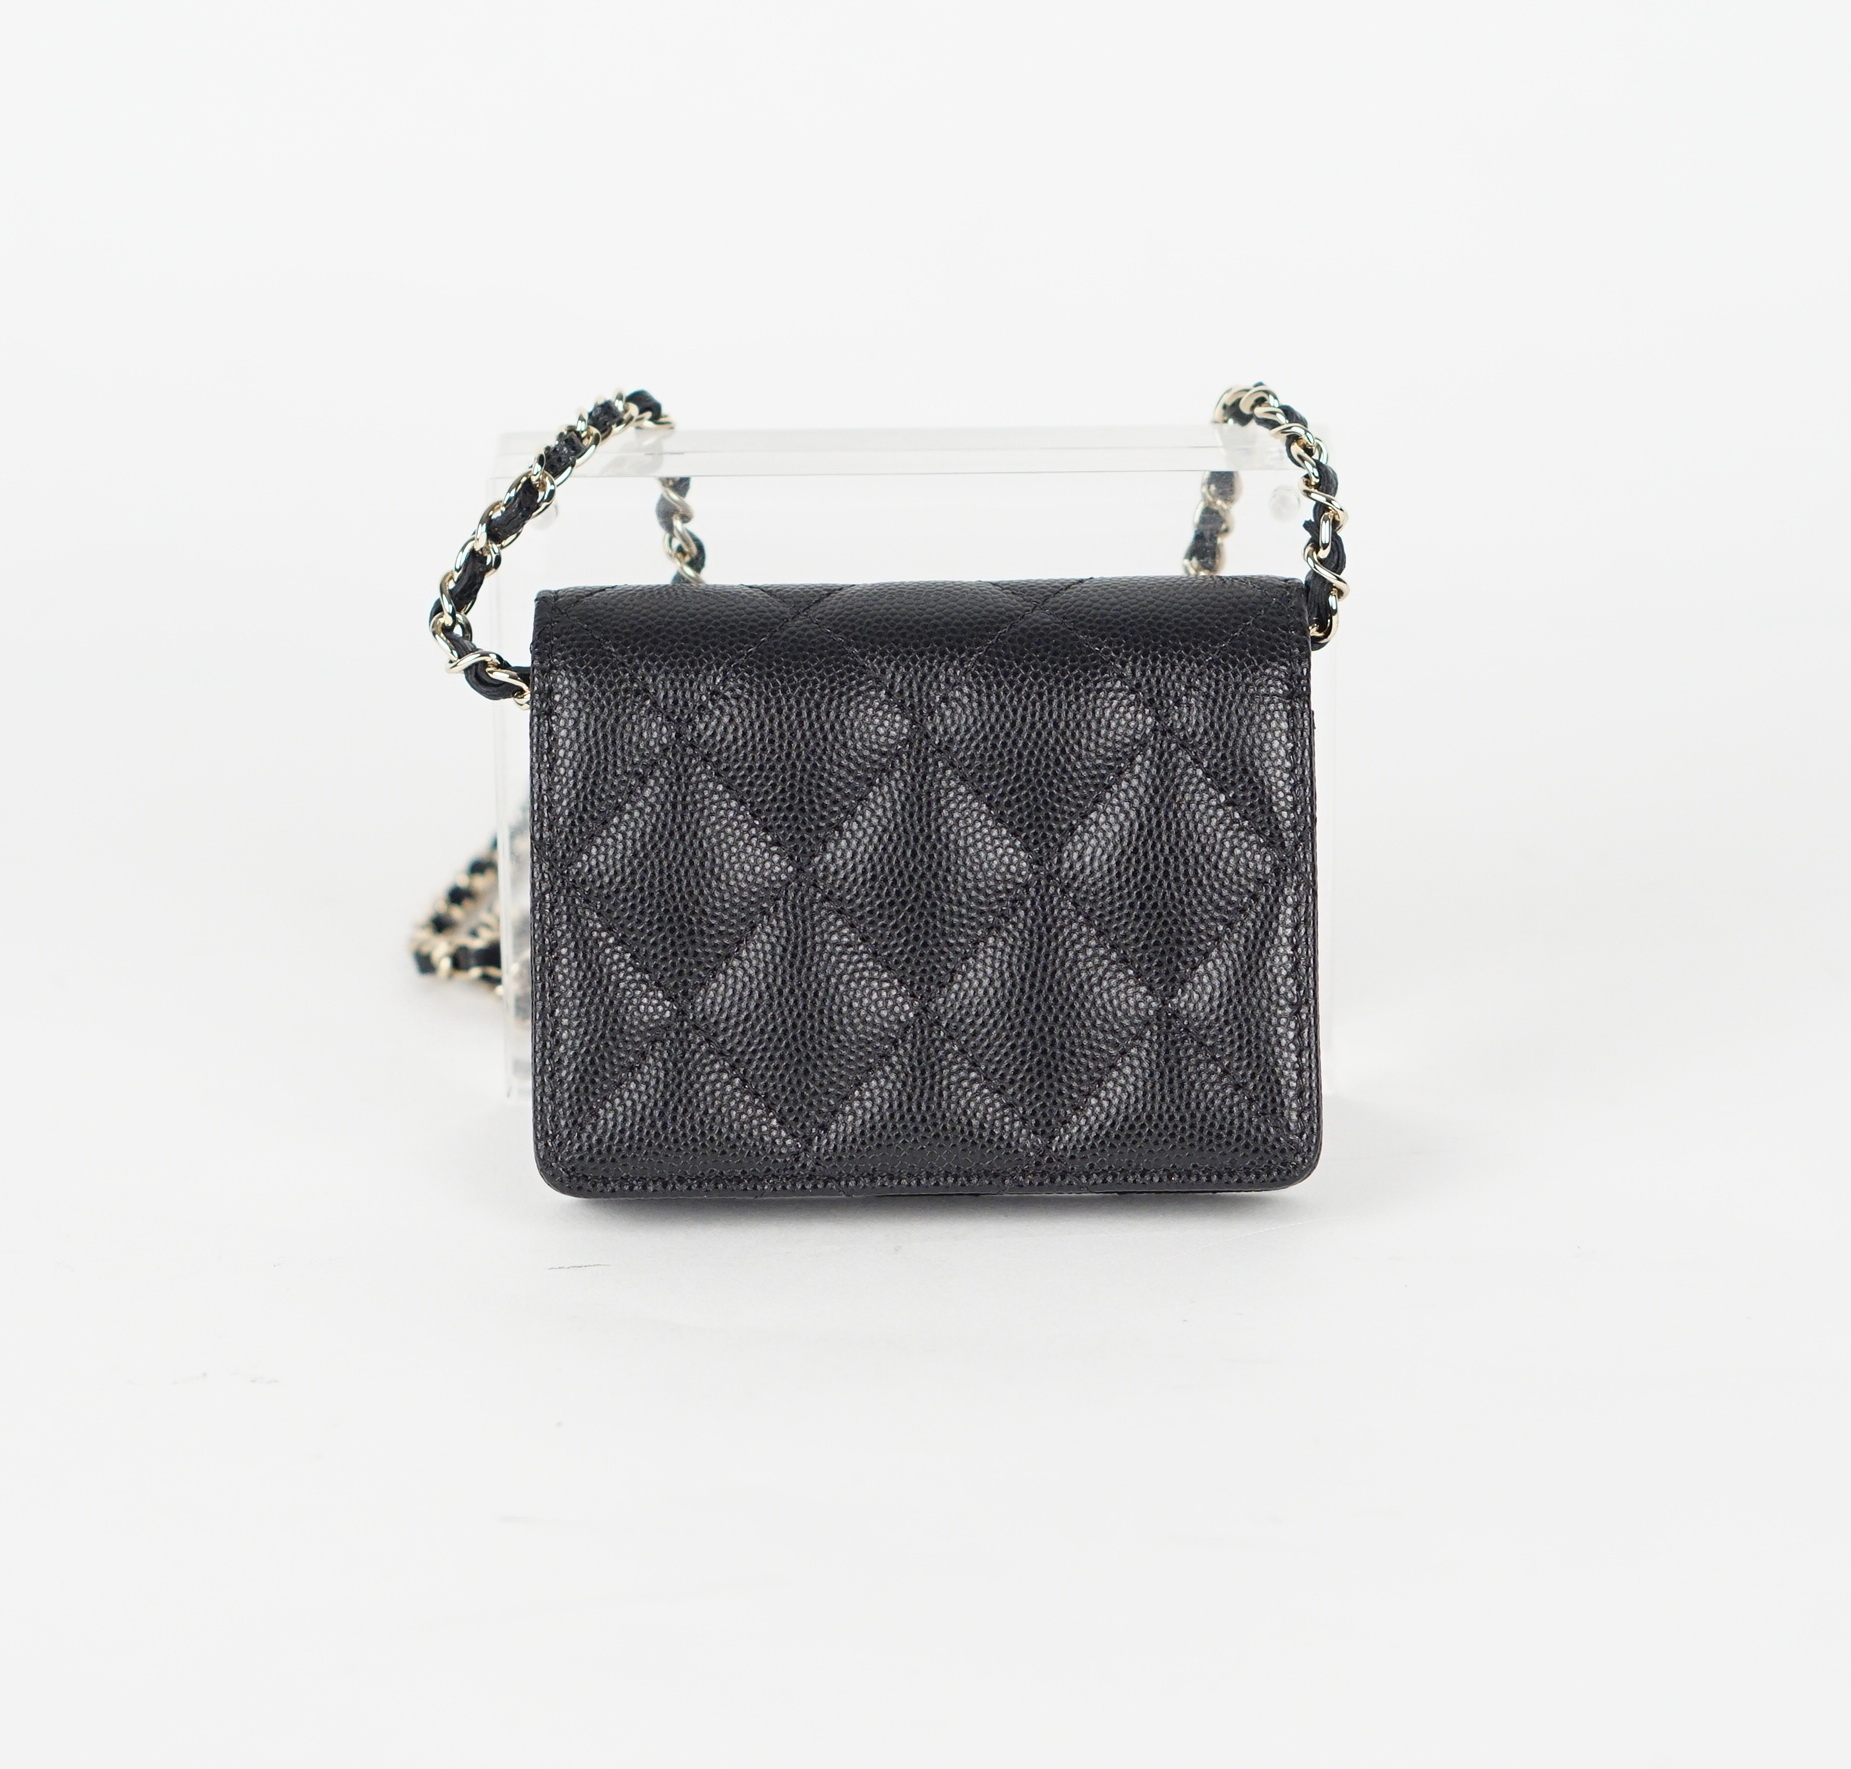 UMHÄNGETASCHE - CHANEL CLASSIC FLAP MINI CARD HOLDER WITH CHAIN